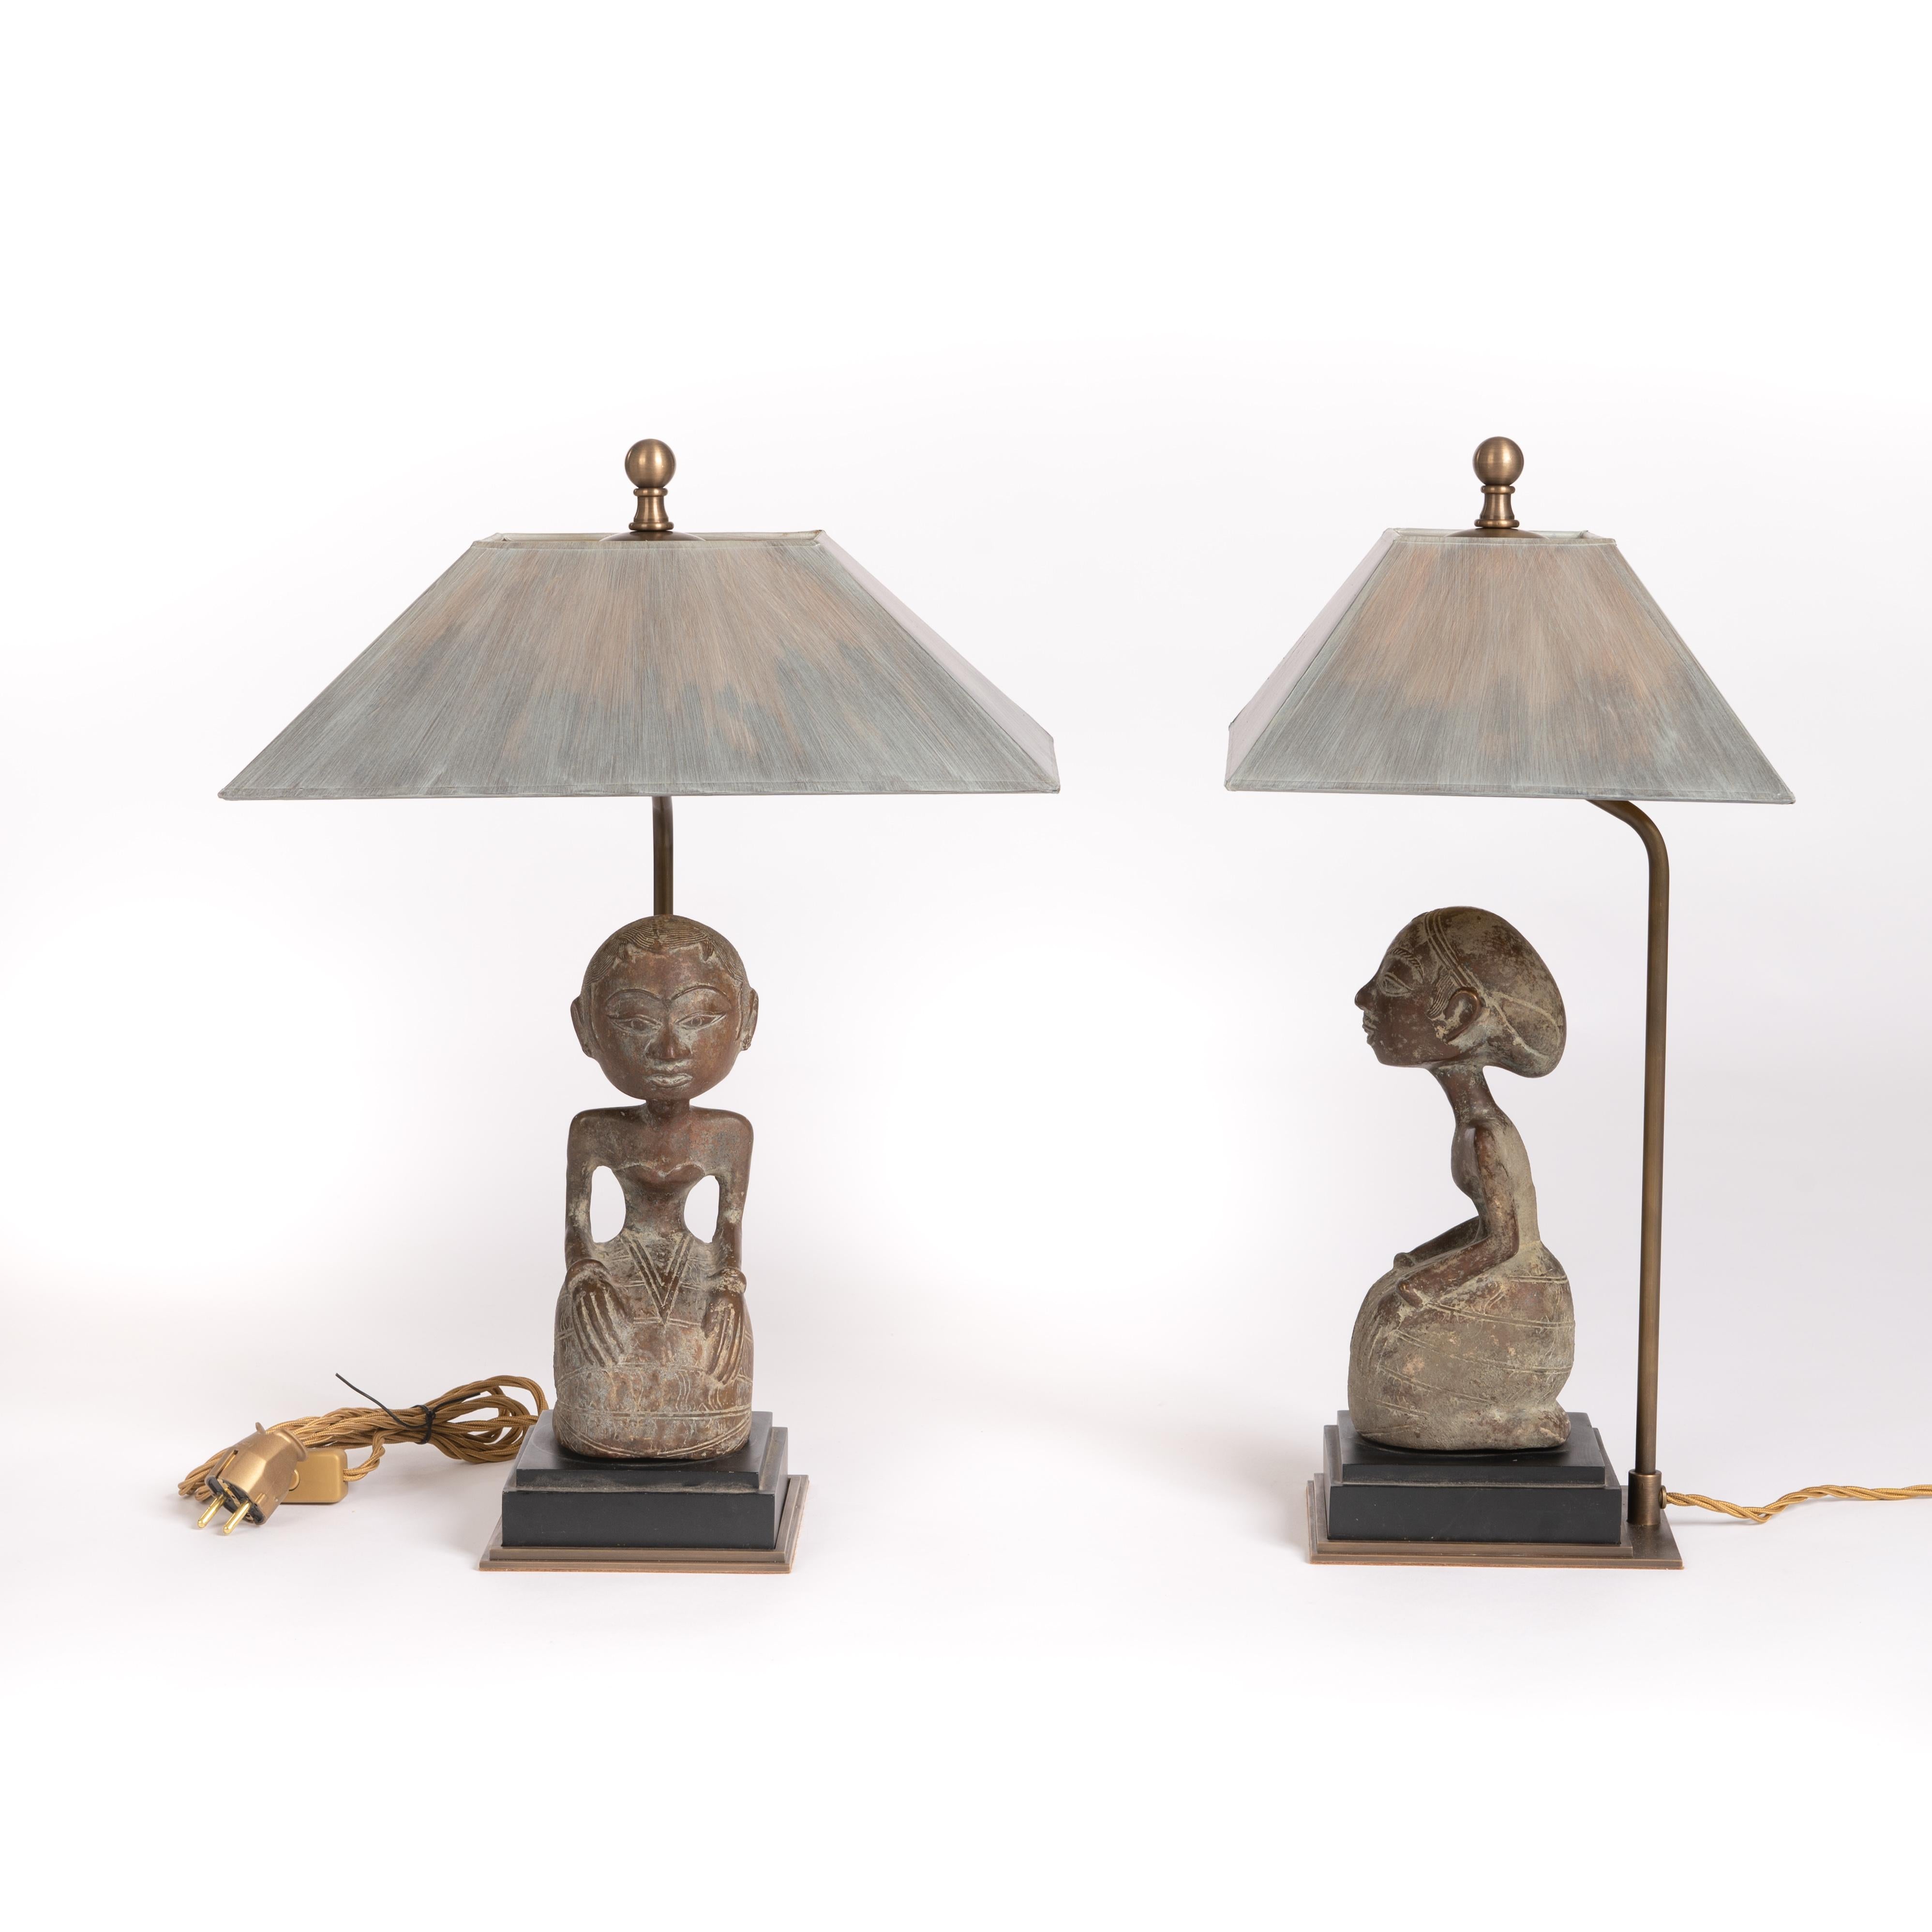 Balinese Pair of Mid-Century Asian Figural Bronze Table Lamps in Brown-Grey Bali 1950s